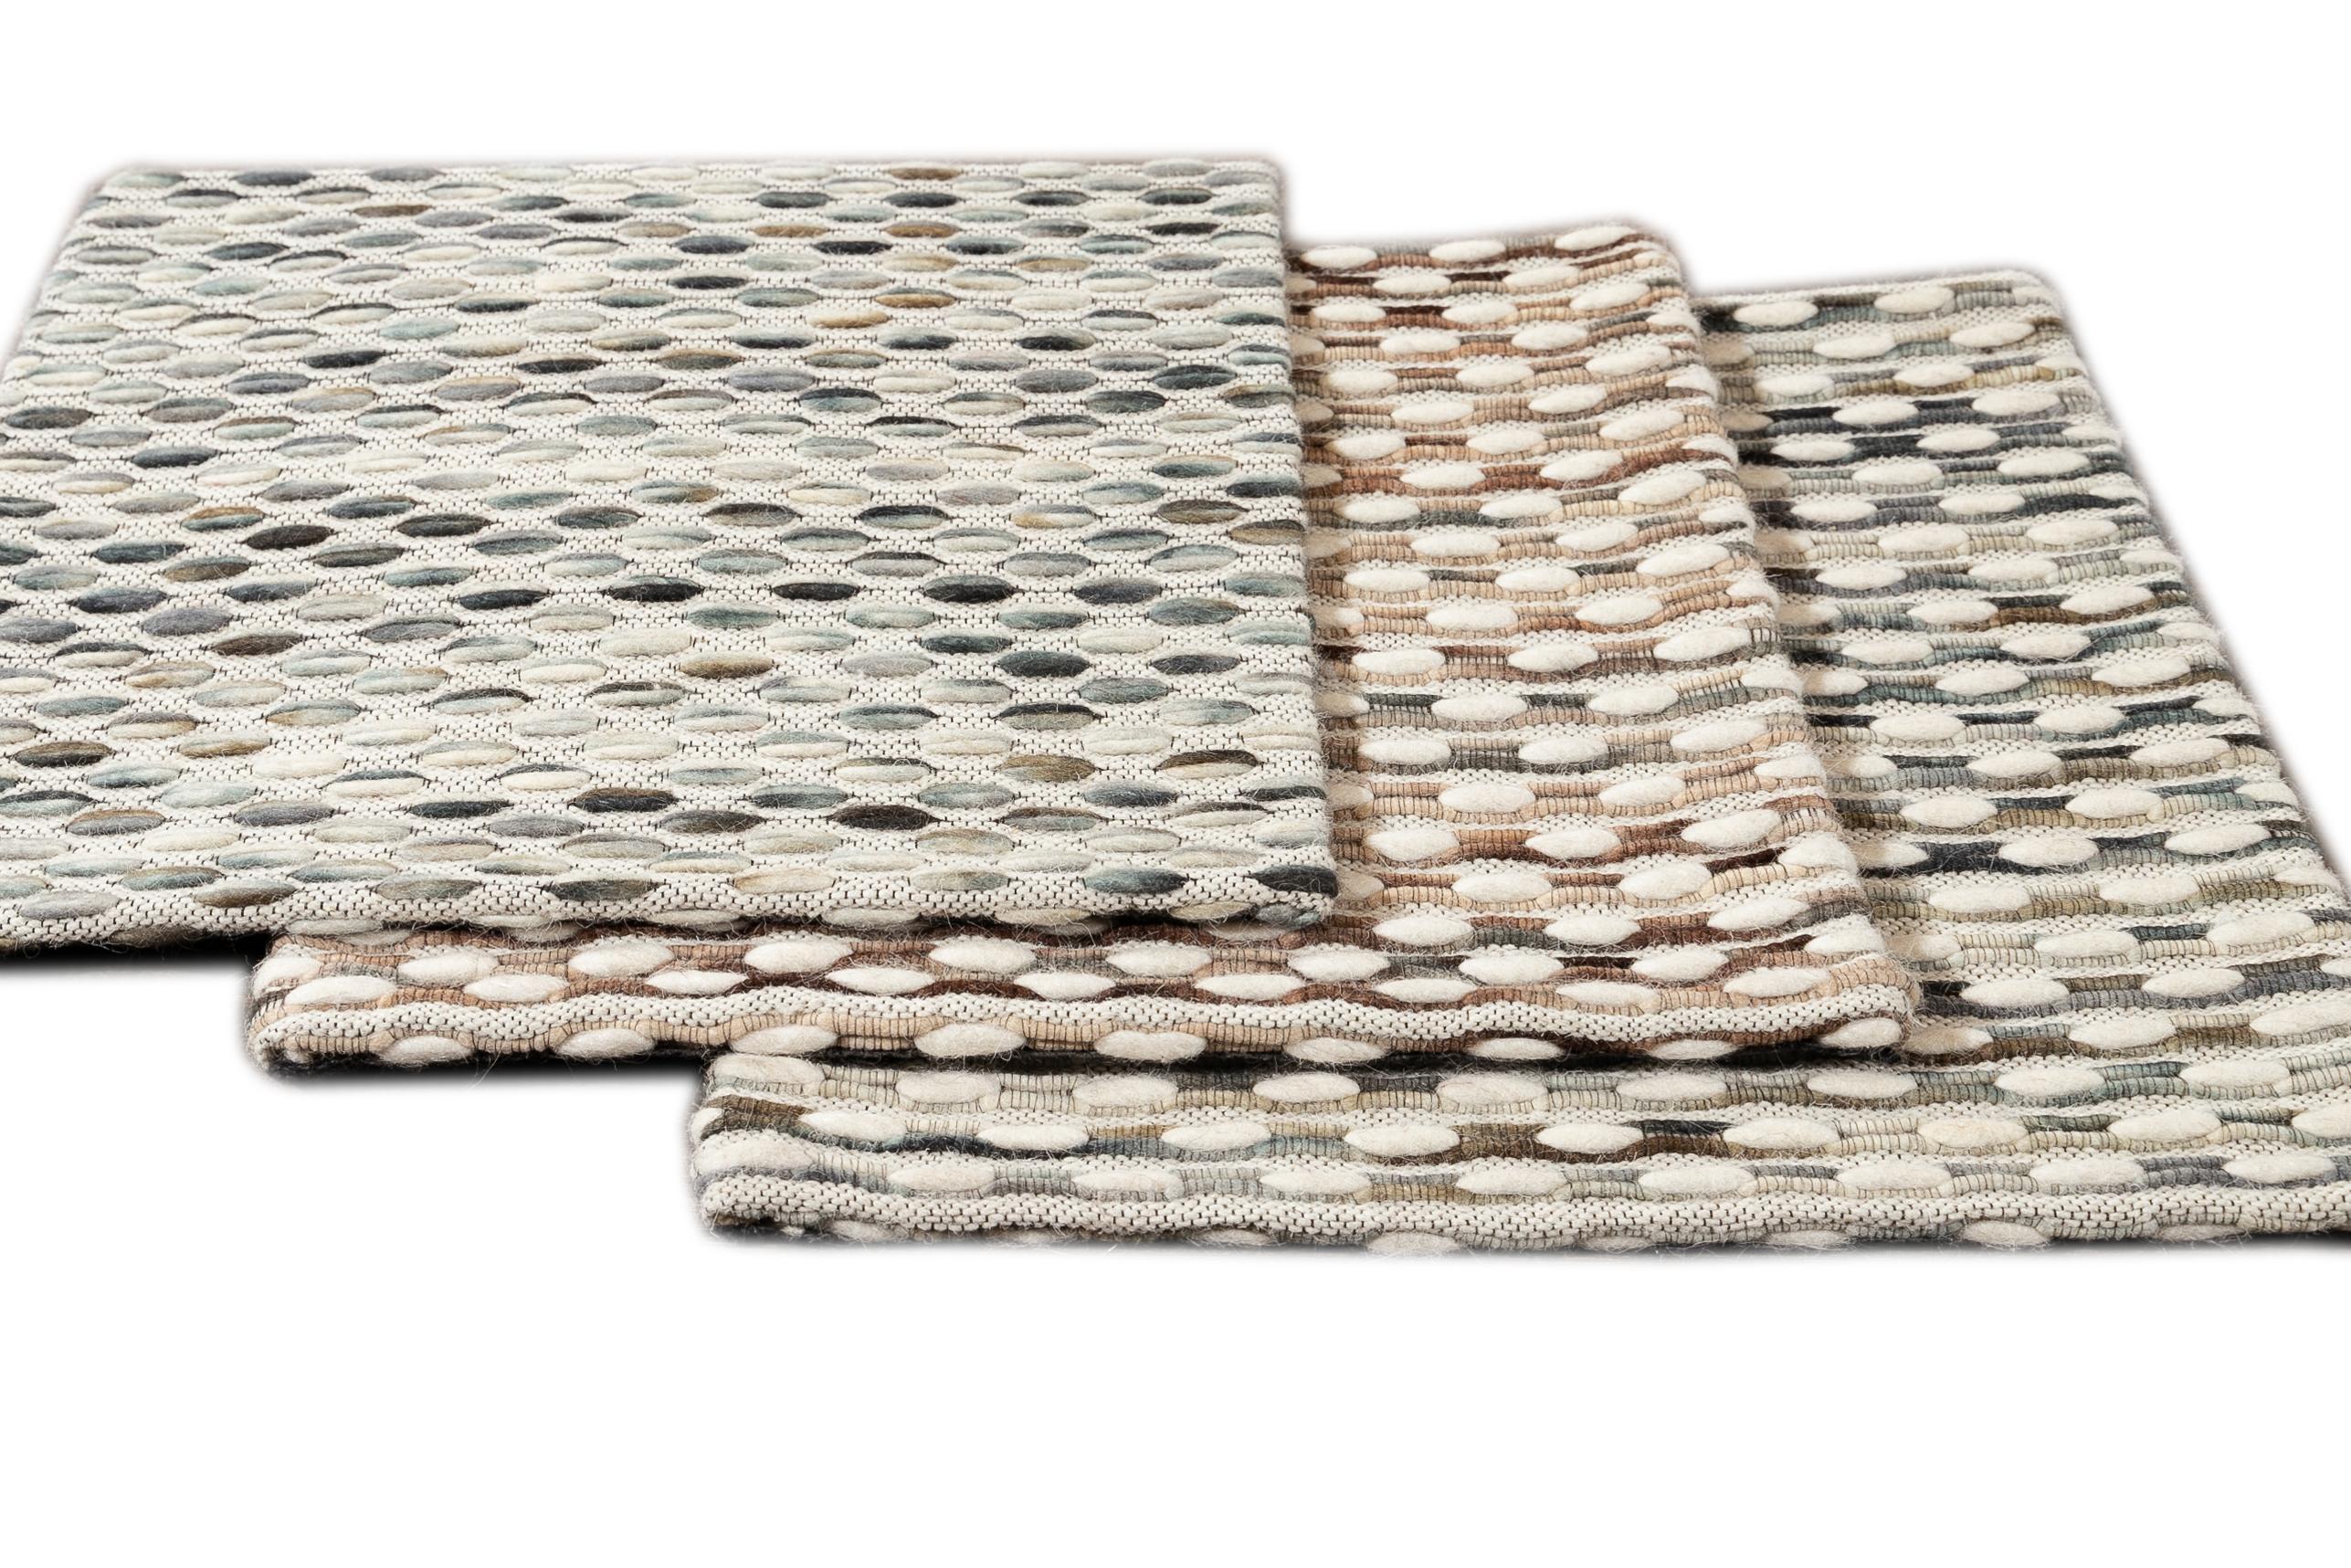 Woven felt jaquard wool textured custom rug. Custom sizes and colors made-to-order. 

Collection: Easton 
Material: Wool 
Lead time: Approx. 15-20 weeks available 
Colors: Nine color combinations 
Made in India 
Price listed is for an 8' x